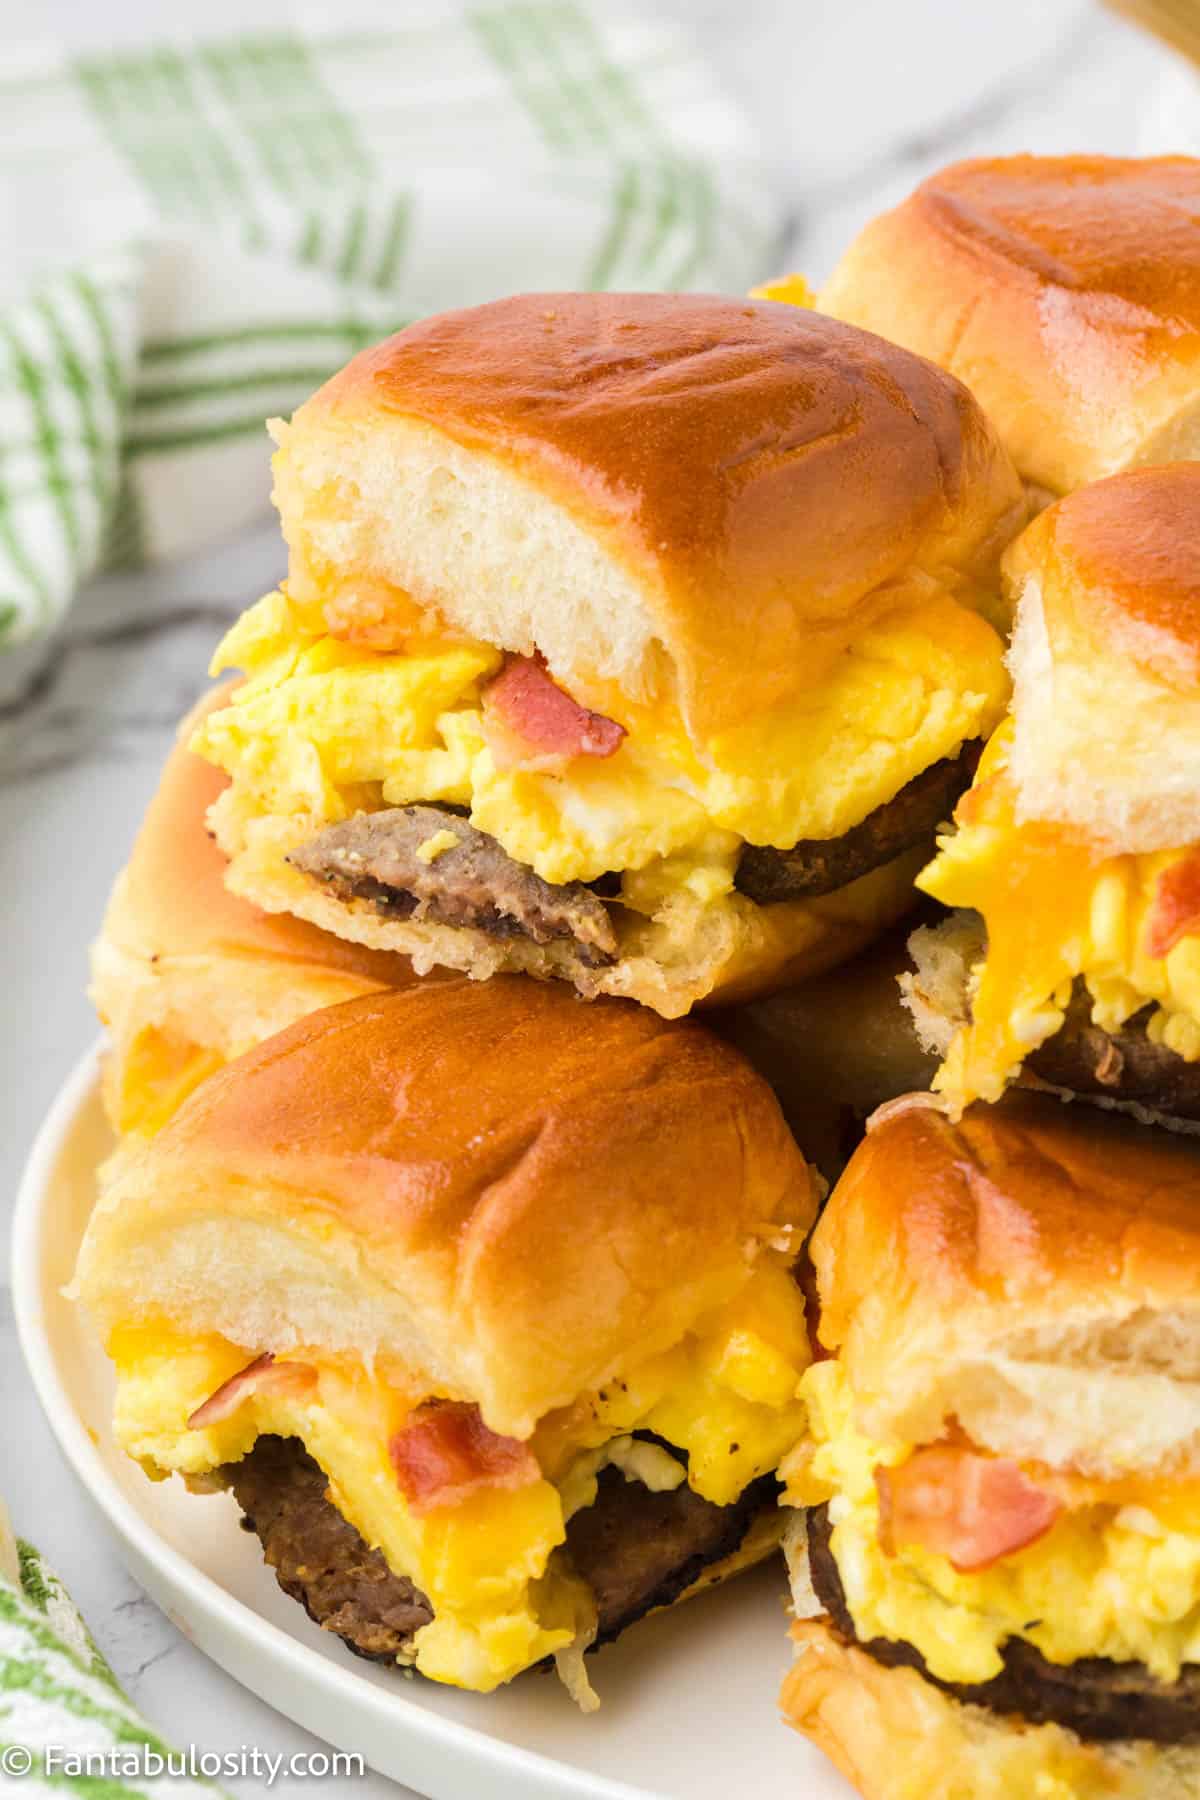 Breakfast slider sandwiches are stacked on a plate making it easy to see sausage, bacon, eggs and cheese on toasted Hawaiian rolls